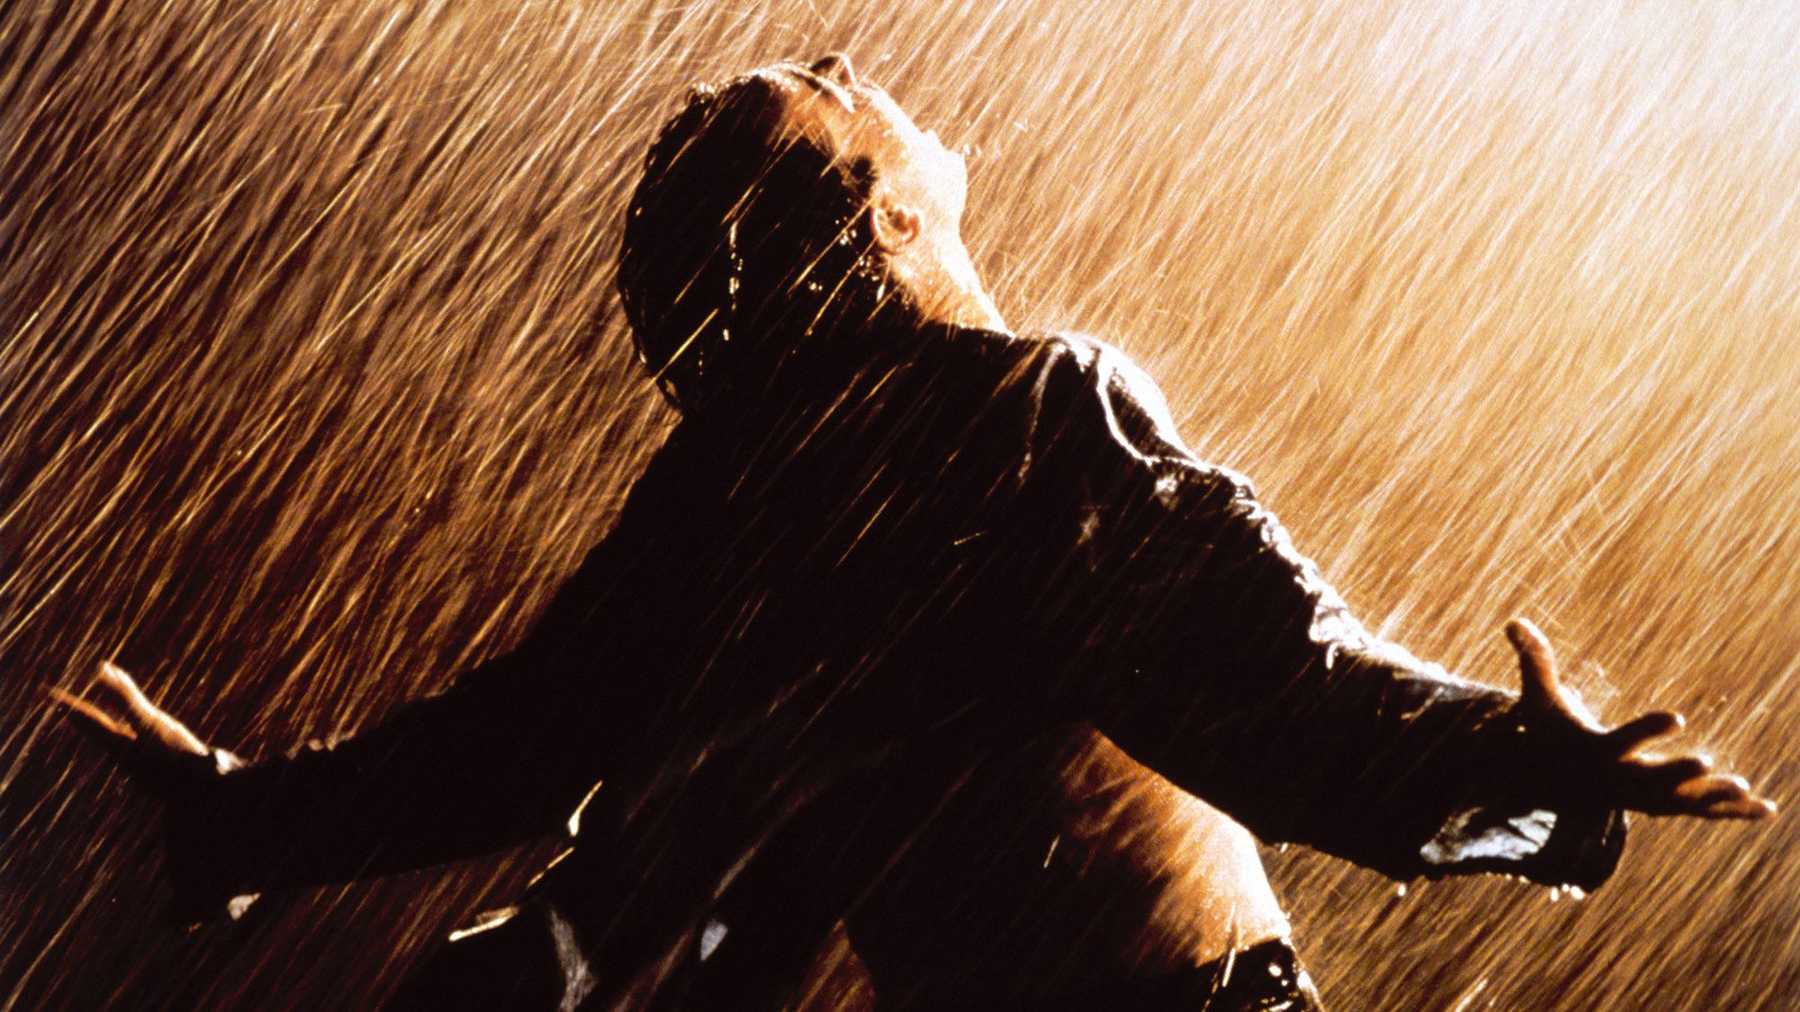 The iconic shot from The Shawshank Redemption of Dufresne standing out in the rain.